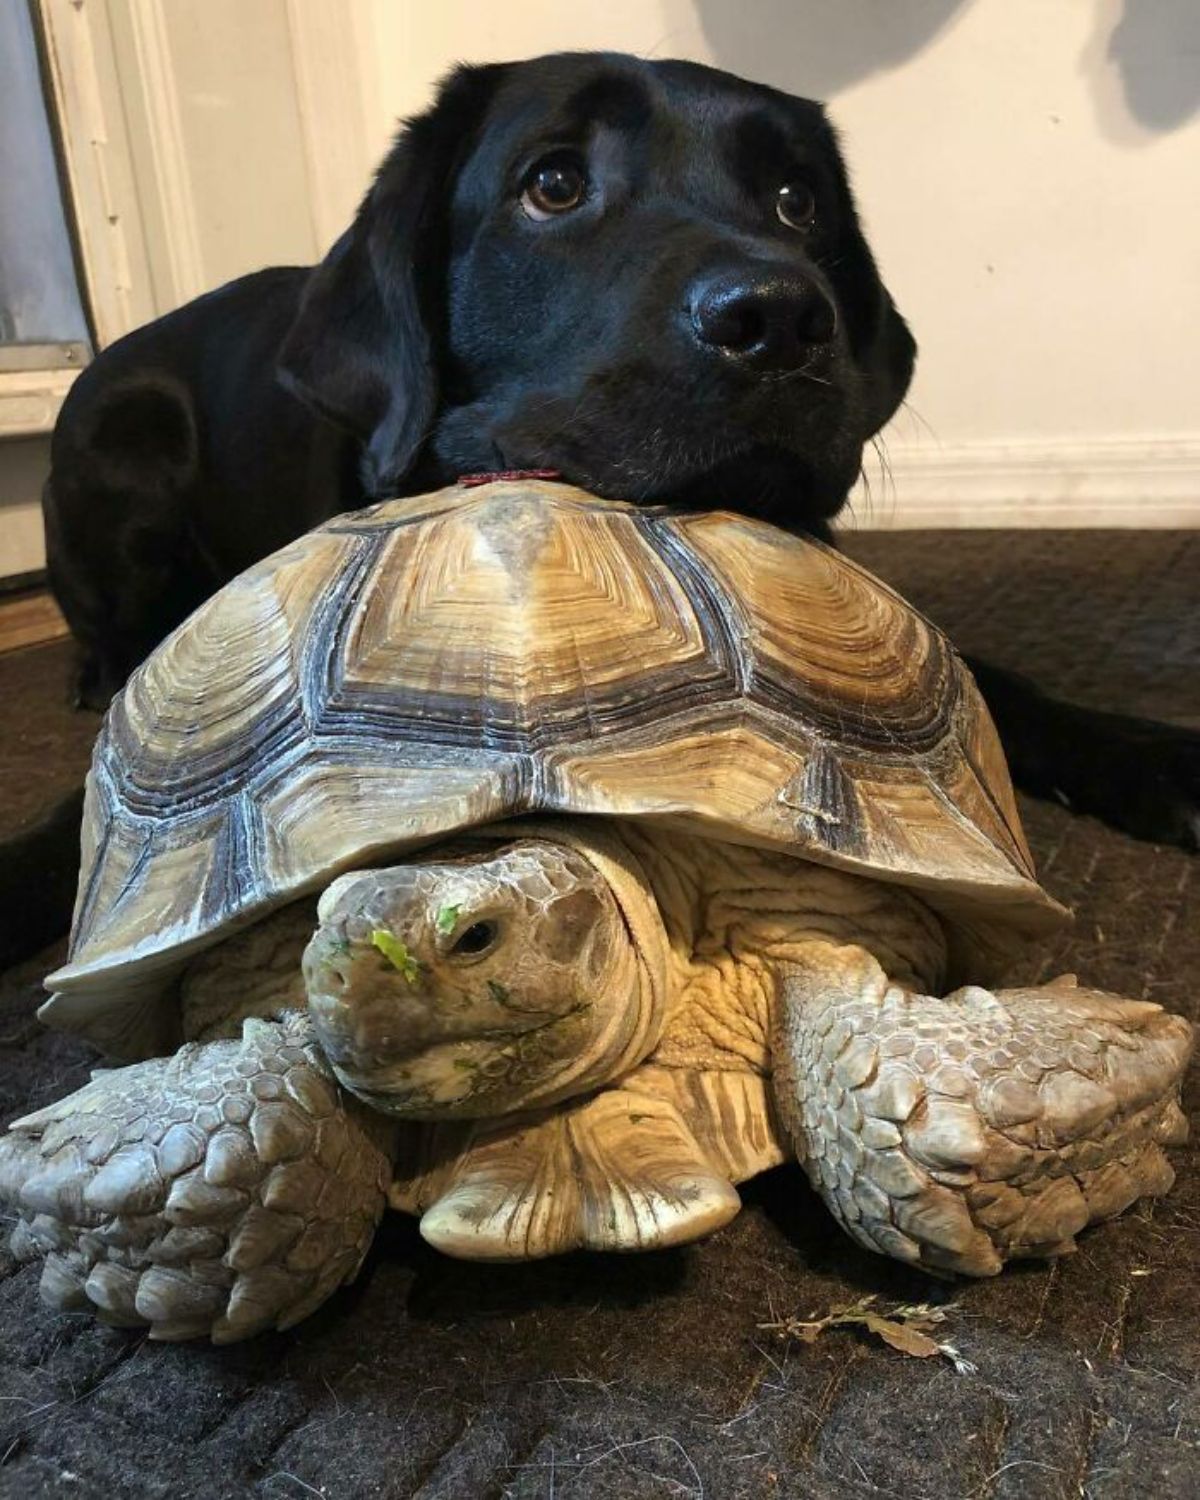 black dog resting its head on the shell of a tortoise